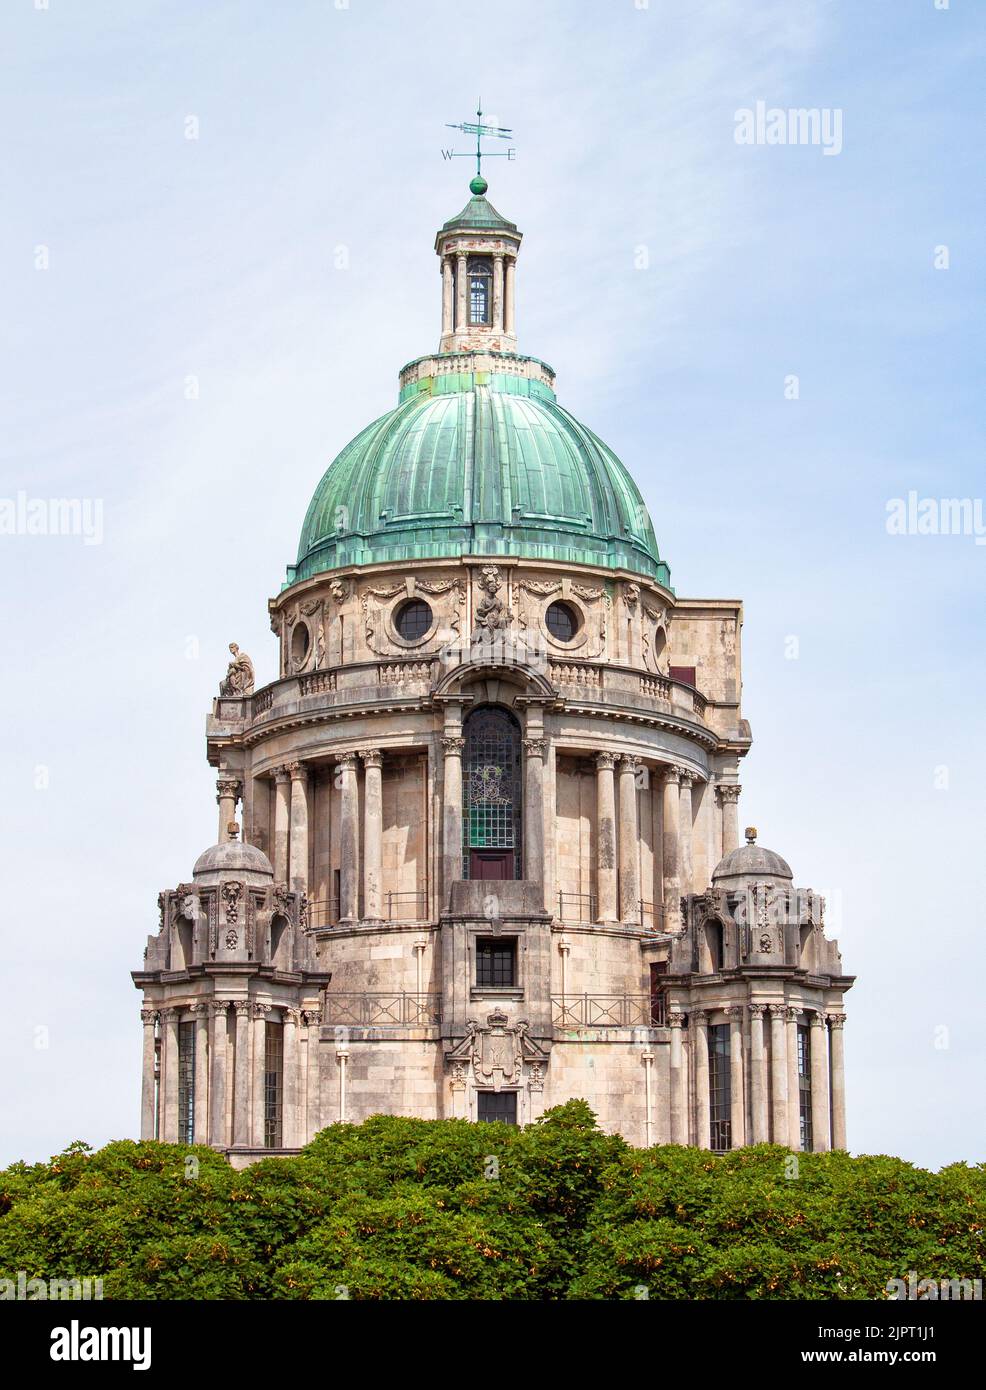 The tower and dome of the Ashton Memorial, rising above the surrounding trees, at Williamson Park, Lancaster, UK Stock Photo